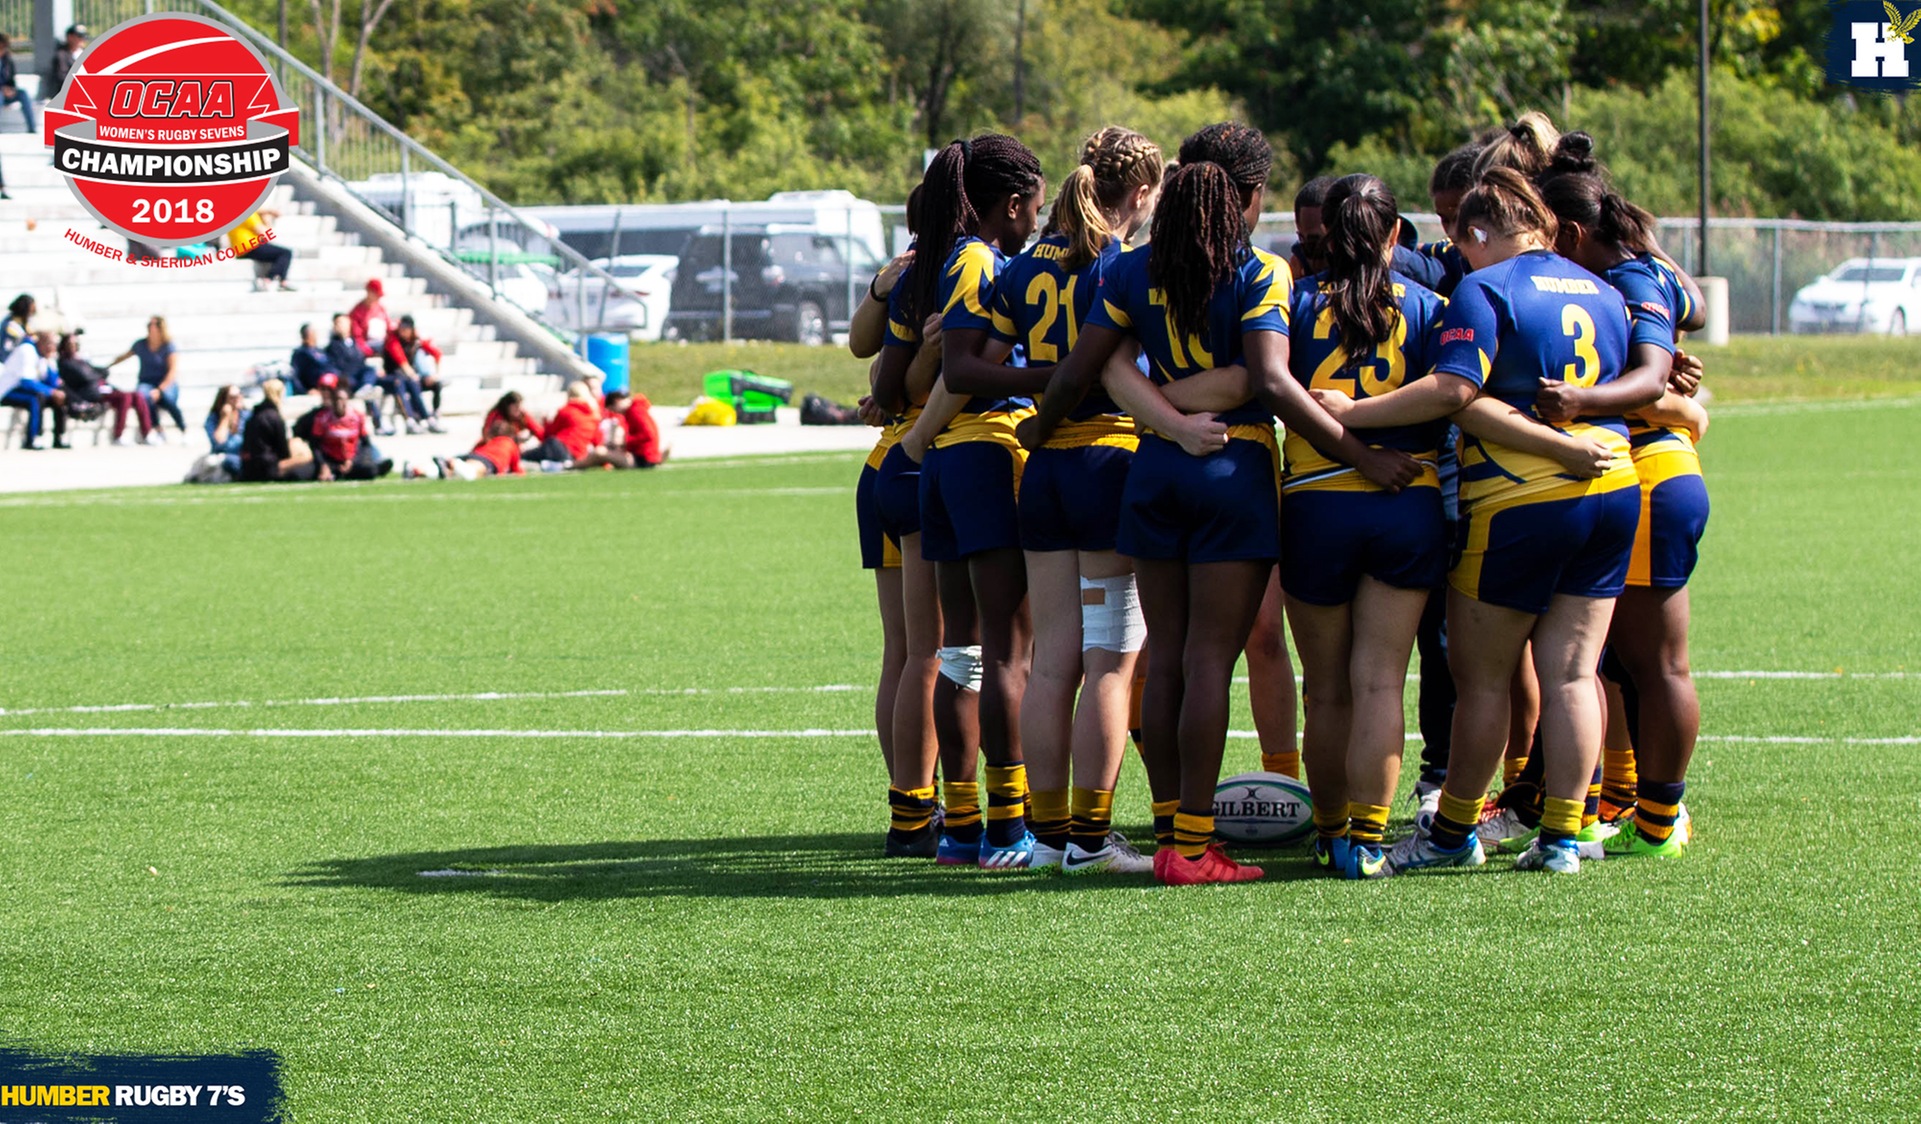 RUGBY 7'S SET FOR OCAA TITLE RUN SATURDAY